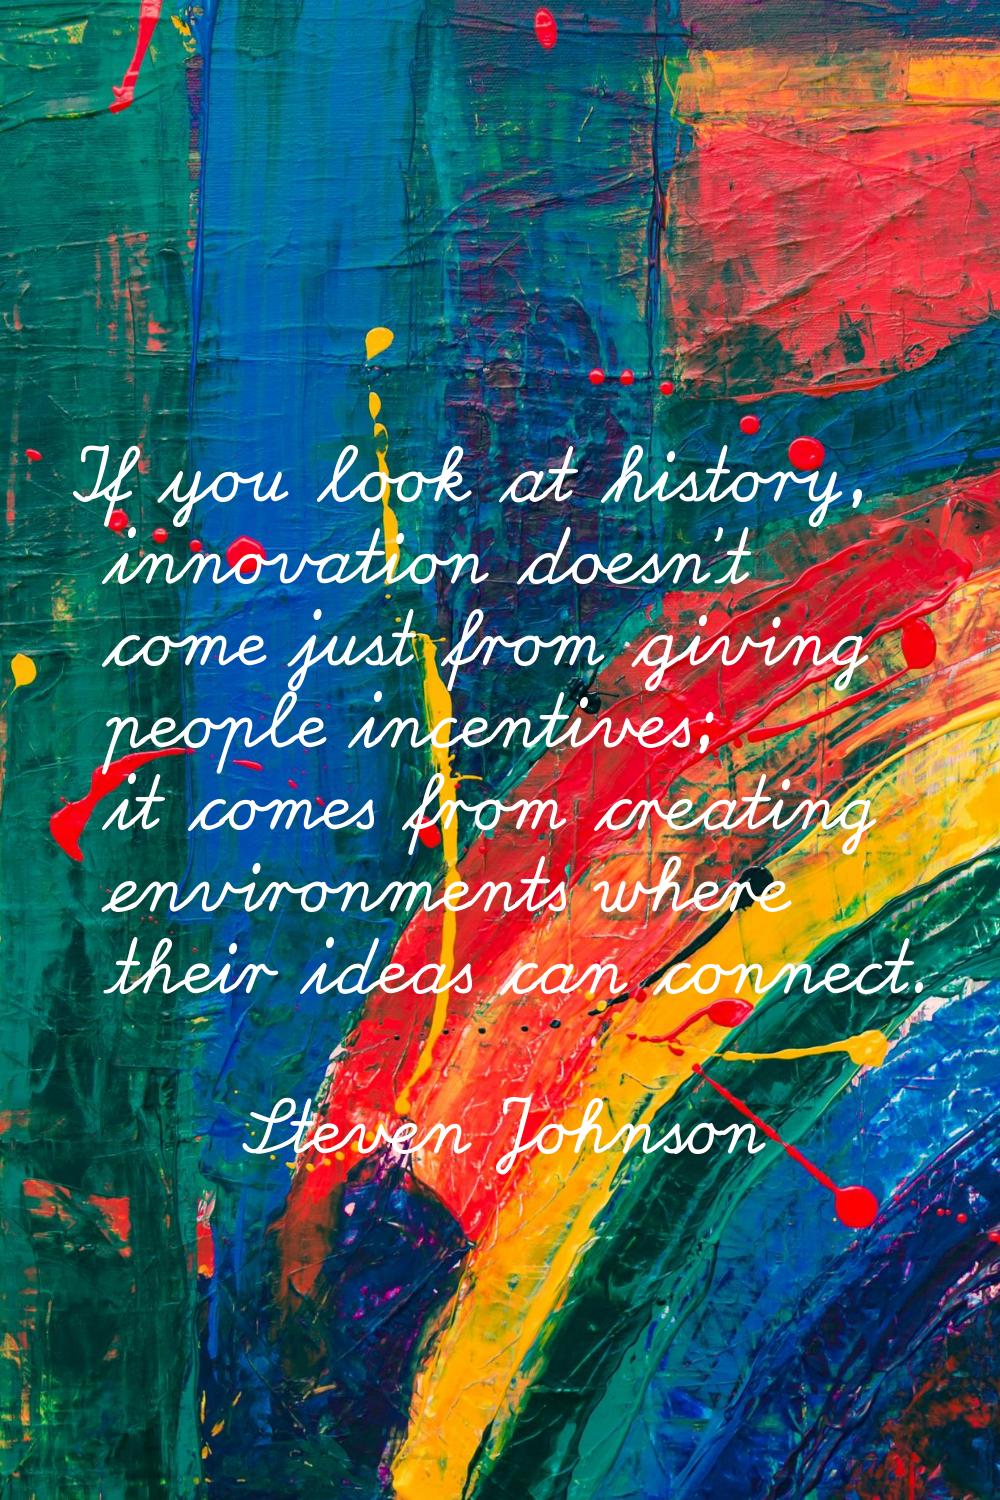 If you look at history, innovation doesn't come just from giving people incentives; it comes from c